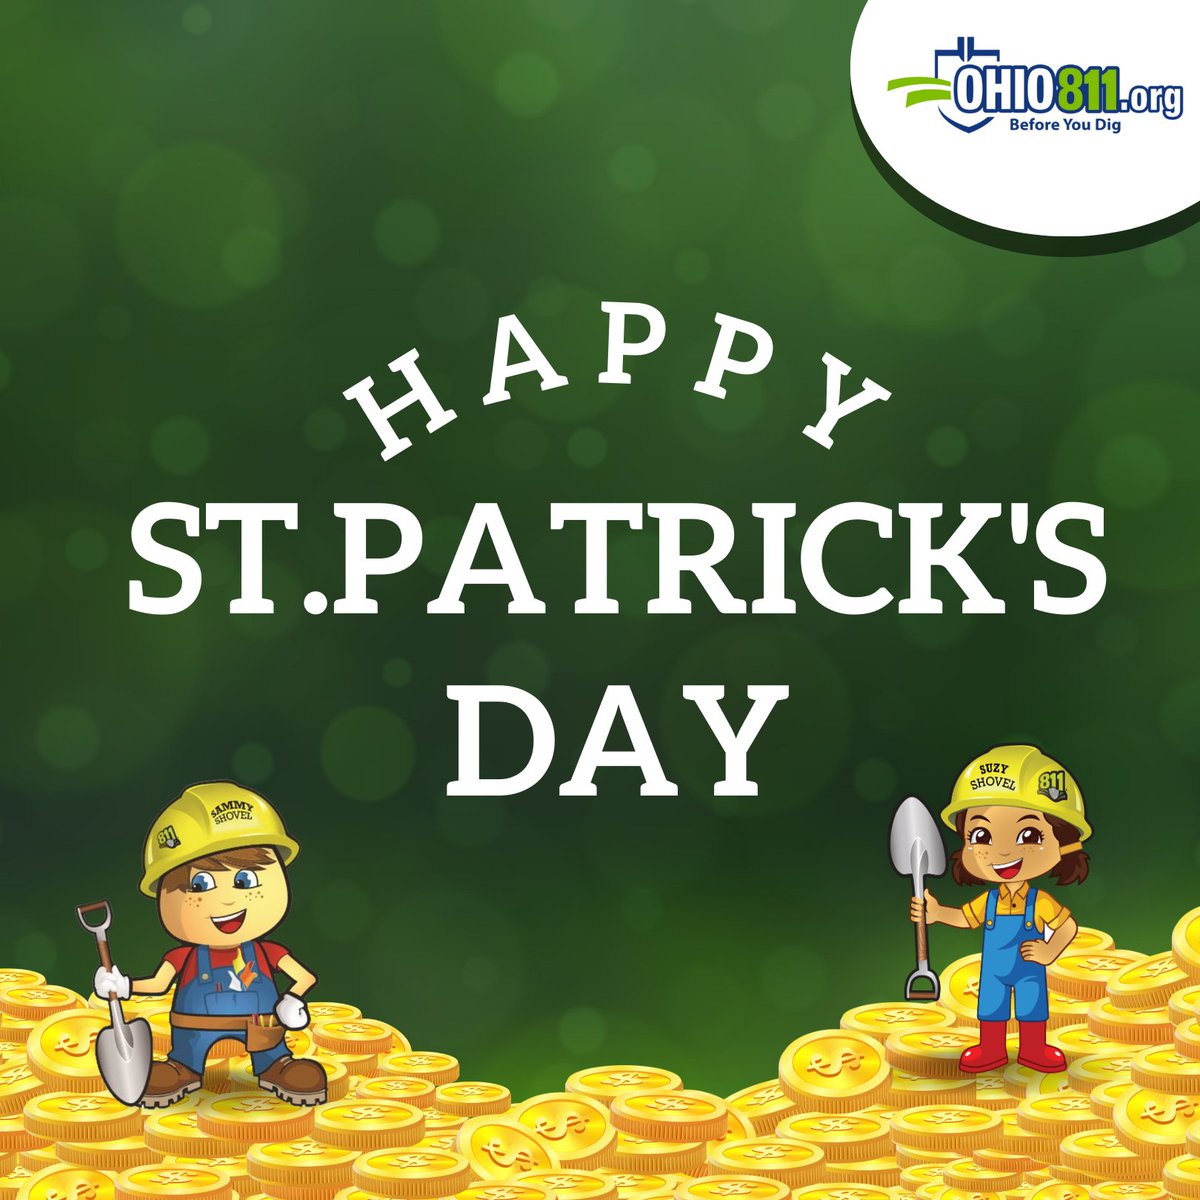 Happy Saint Patrick’s Day from OHIO811 

Don’t rely on luck when it comes to underground utilities. Always contact OHIO811 before you dig.  

#OHIO811 #contactbeforeyoudig #stpatricksday #WorkplaceSafety #DamagePrevention #ExcavationSafety #UtilityLocating #SafeDigging #DigSafe